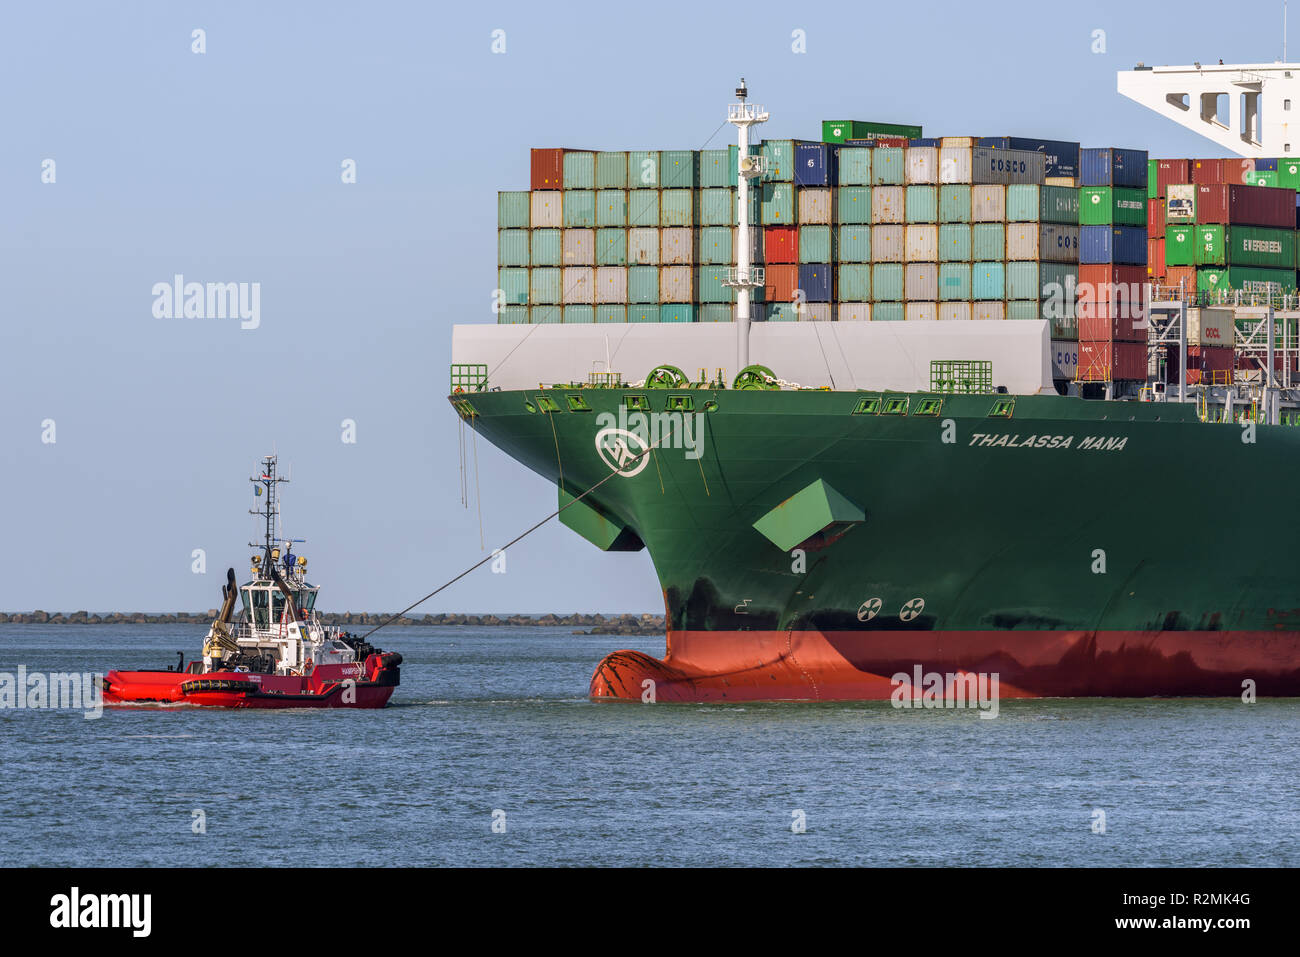 ROTTERDAM, THE NETHERLANDS - FEBRUARY 16, 2018: The large container ship Thalassa Mana is escorted by a tug at its arrival at the Maasvlakte, Port of  Stock Photo